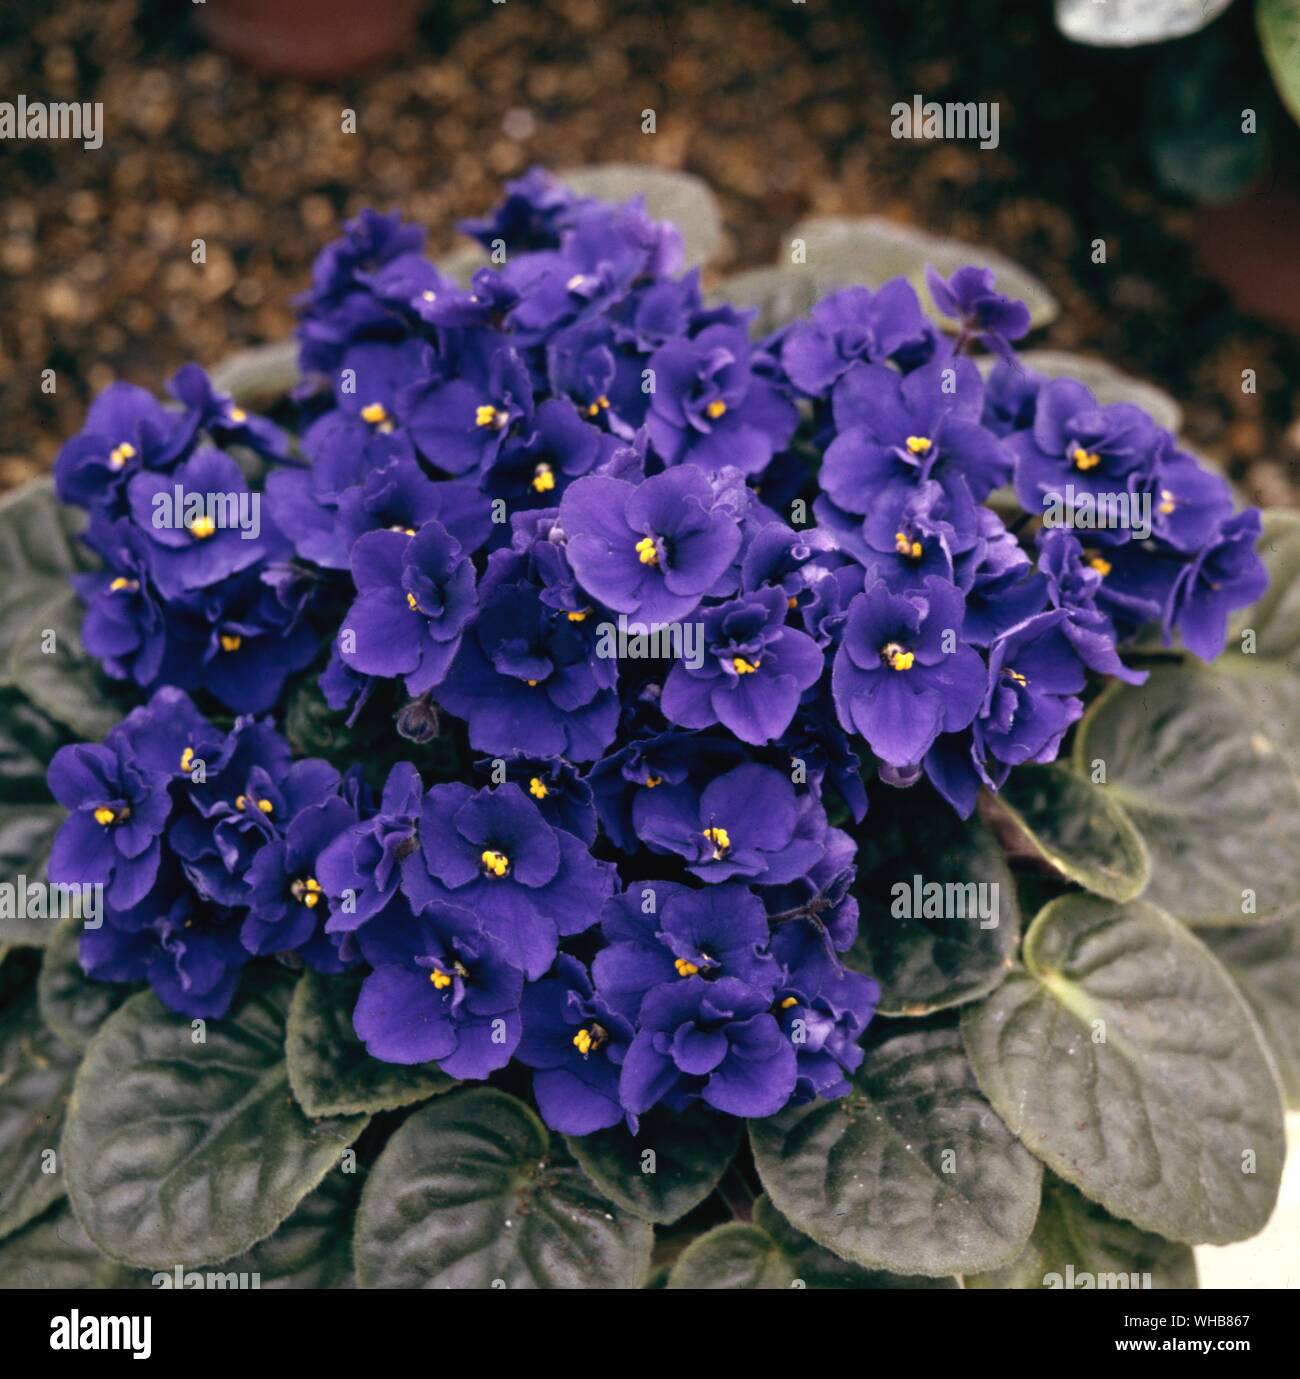 Saintpulia Rhapsody deep blue - commonly known as African violet, is a genus of species of herbaceous perennial flowering plants in the Gesneriaceae family, native to Tanzania, and named after Baron Walter von Saint Paul (1860-1910) who discovered the plant in Tanganyika (Tanzania) in Africa.. Stock Photo